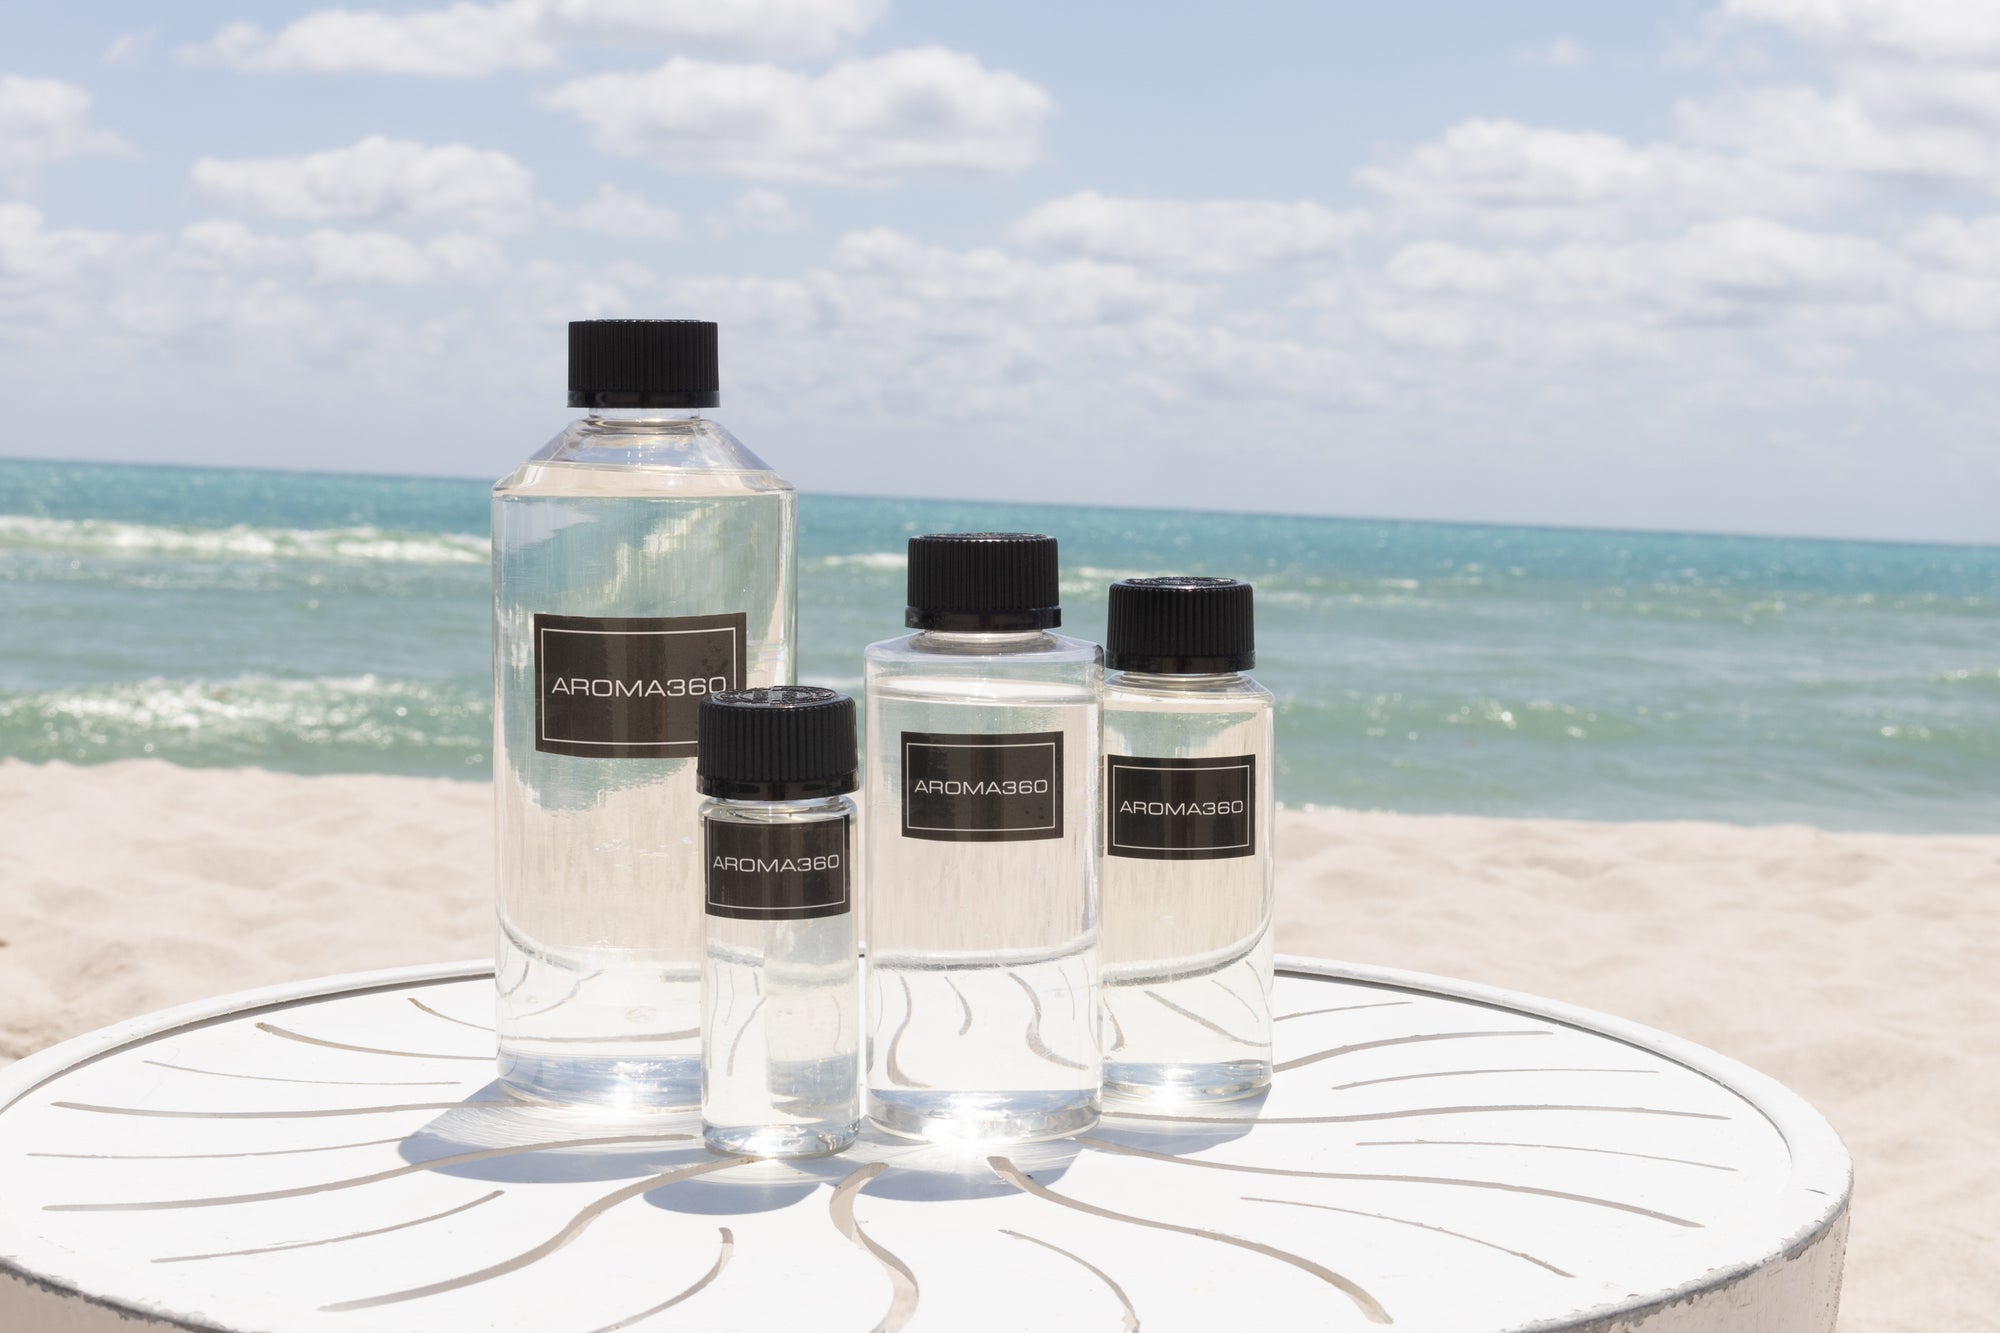 Introducing our New Summer Scent Collection